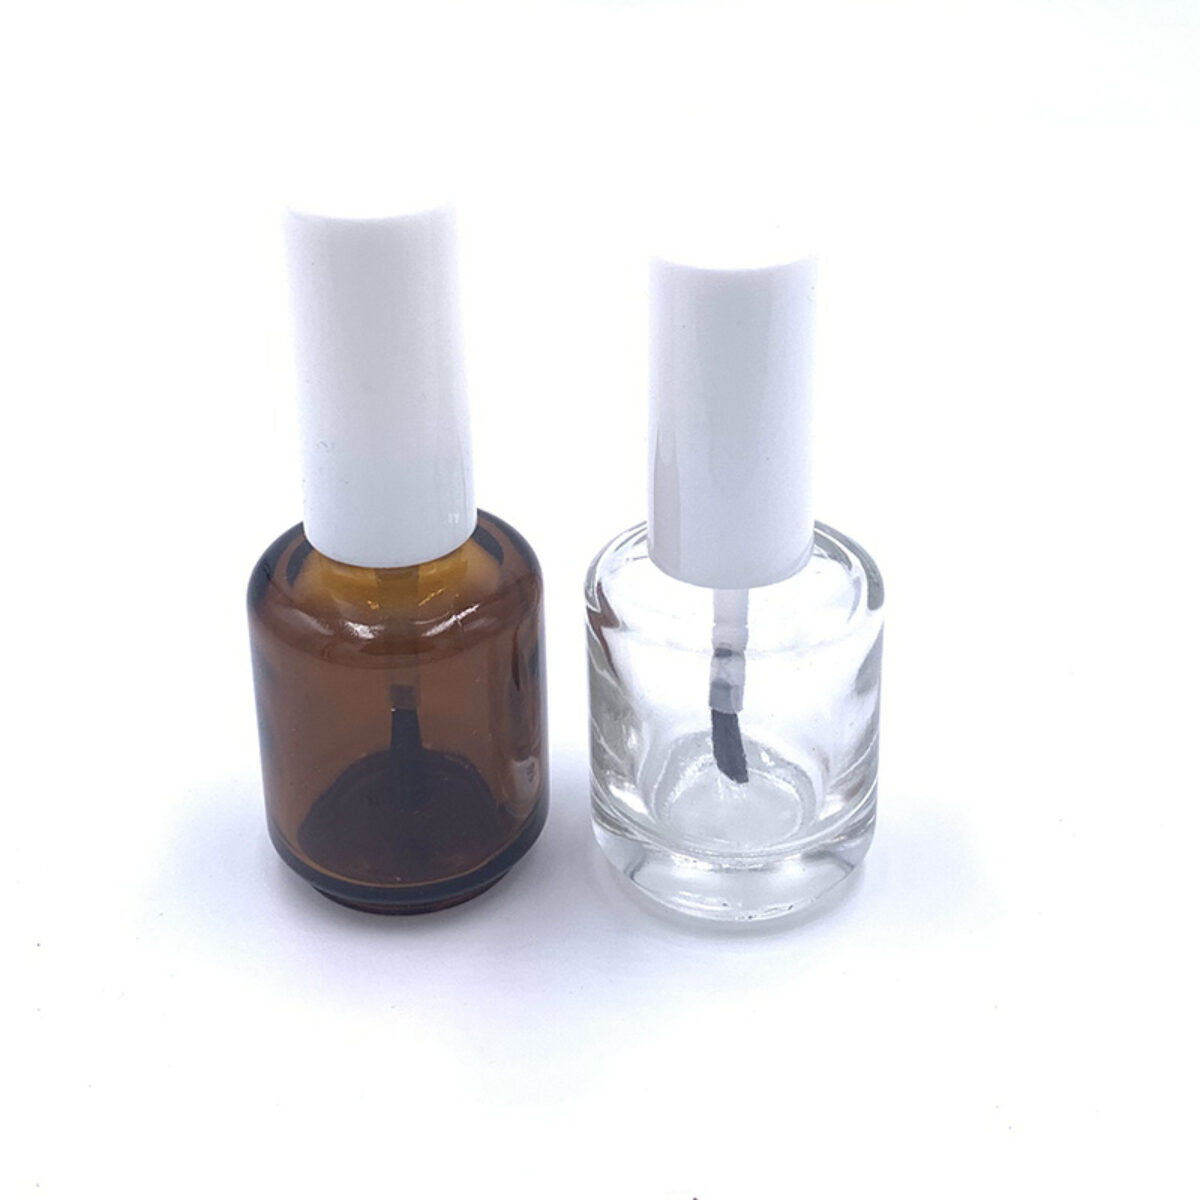 Wholesale Portable 7ML Glass 5ml Nail Polish Bottles With Cap And Brush  Ideal For Nails, Oil, And Paint From Viviien, $32.93 | DHgate.Com